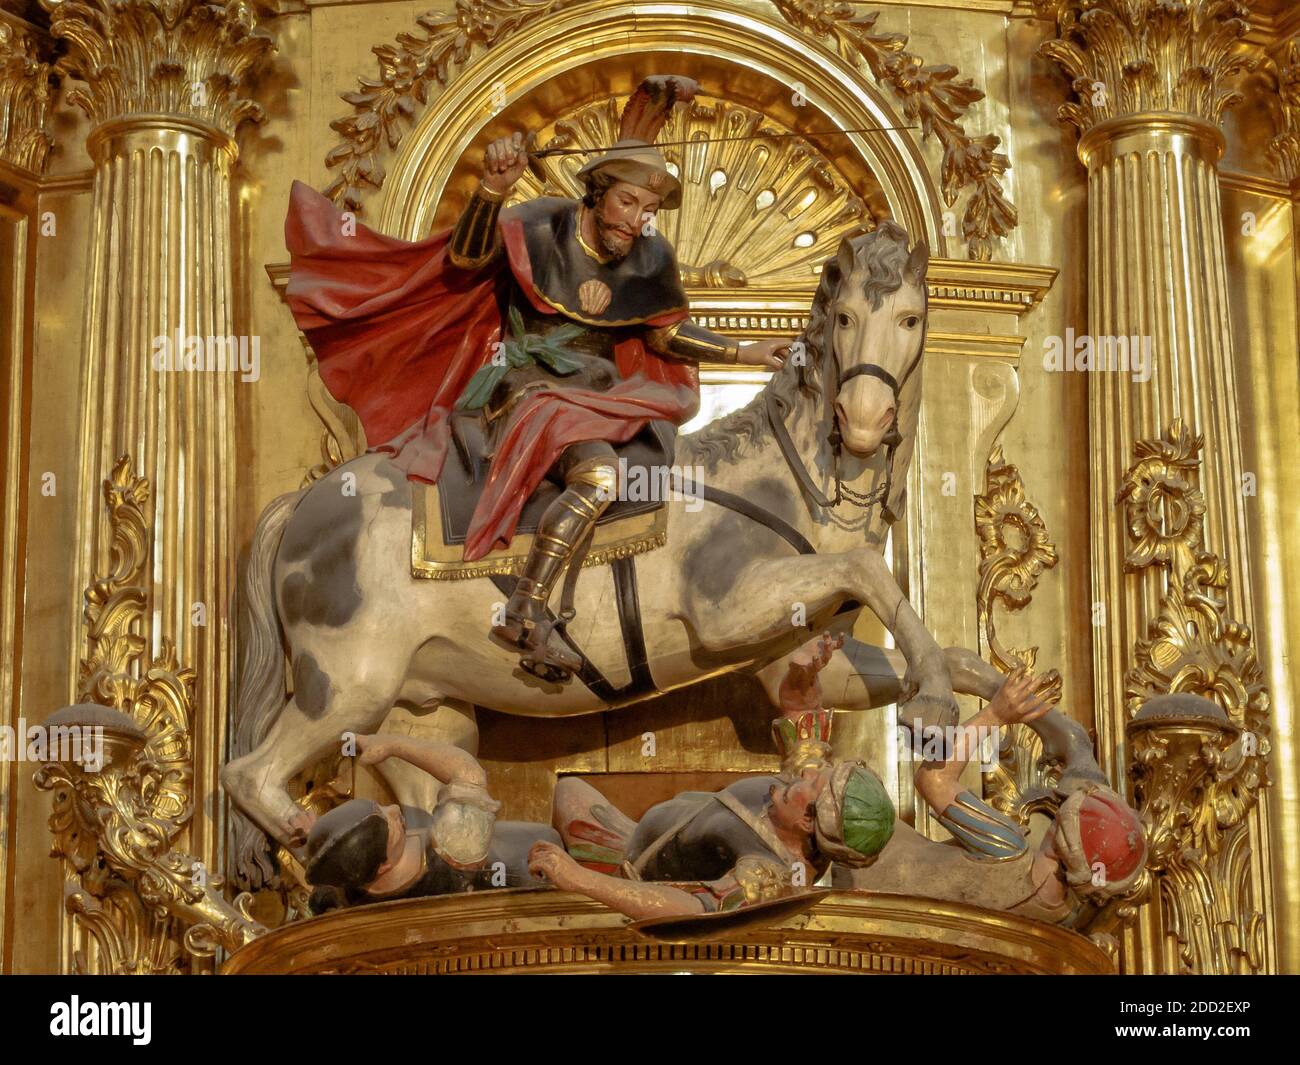 St James as 'Matamoros', slayer of the Moors, in the Cathedral of Saint Mary - Burgos, Castile and Leon, Spain Stock Photo